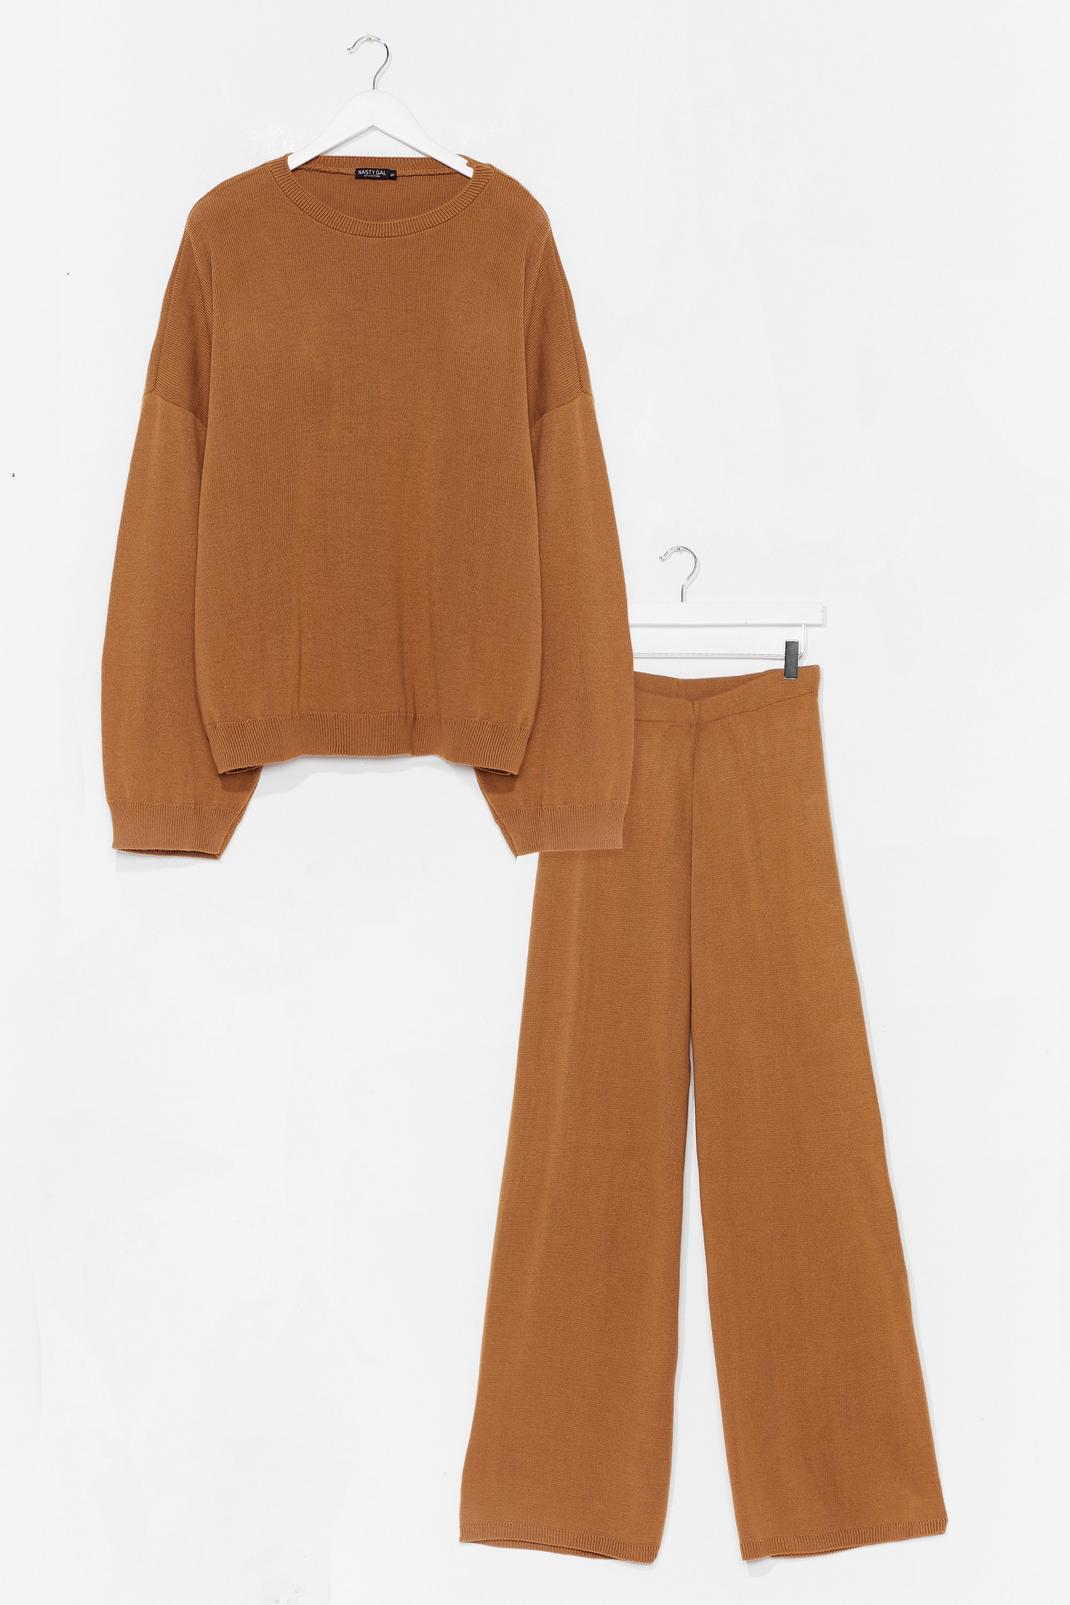 Camel You've Met Your Match Knitted Jumper and Pants image number 1